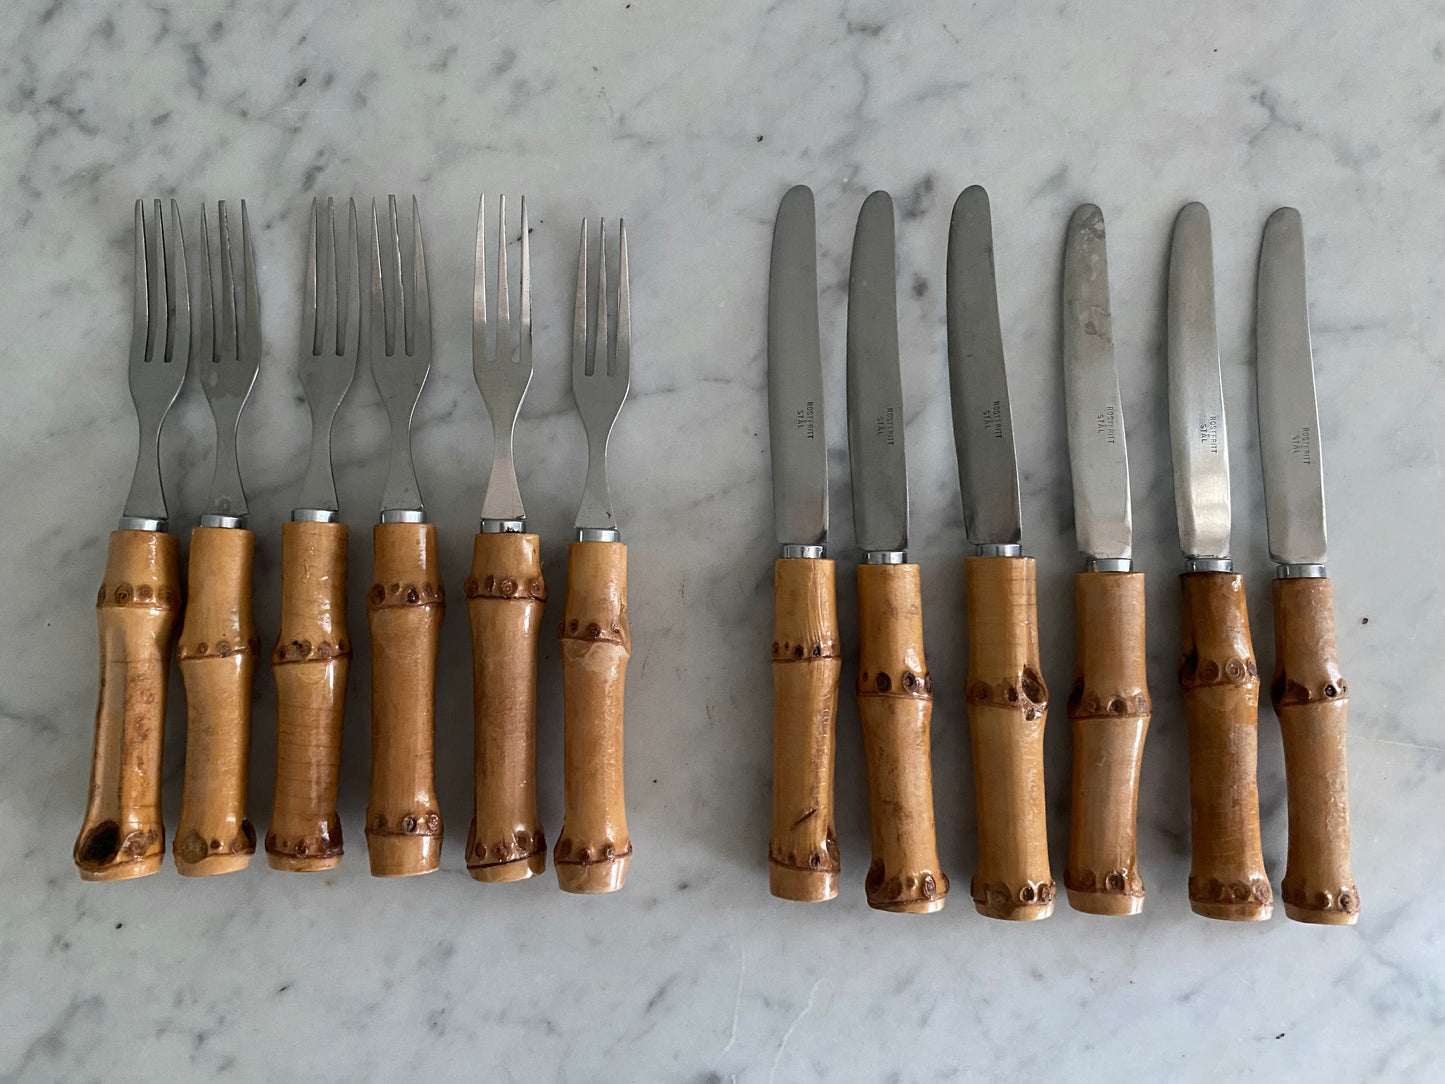 Set of 12 small vintage bamboo forks and knives